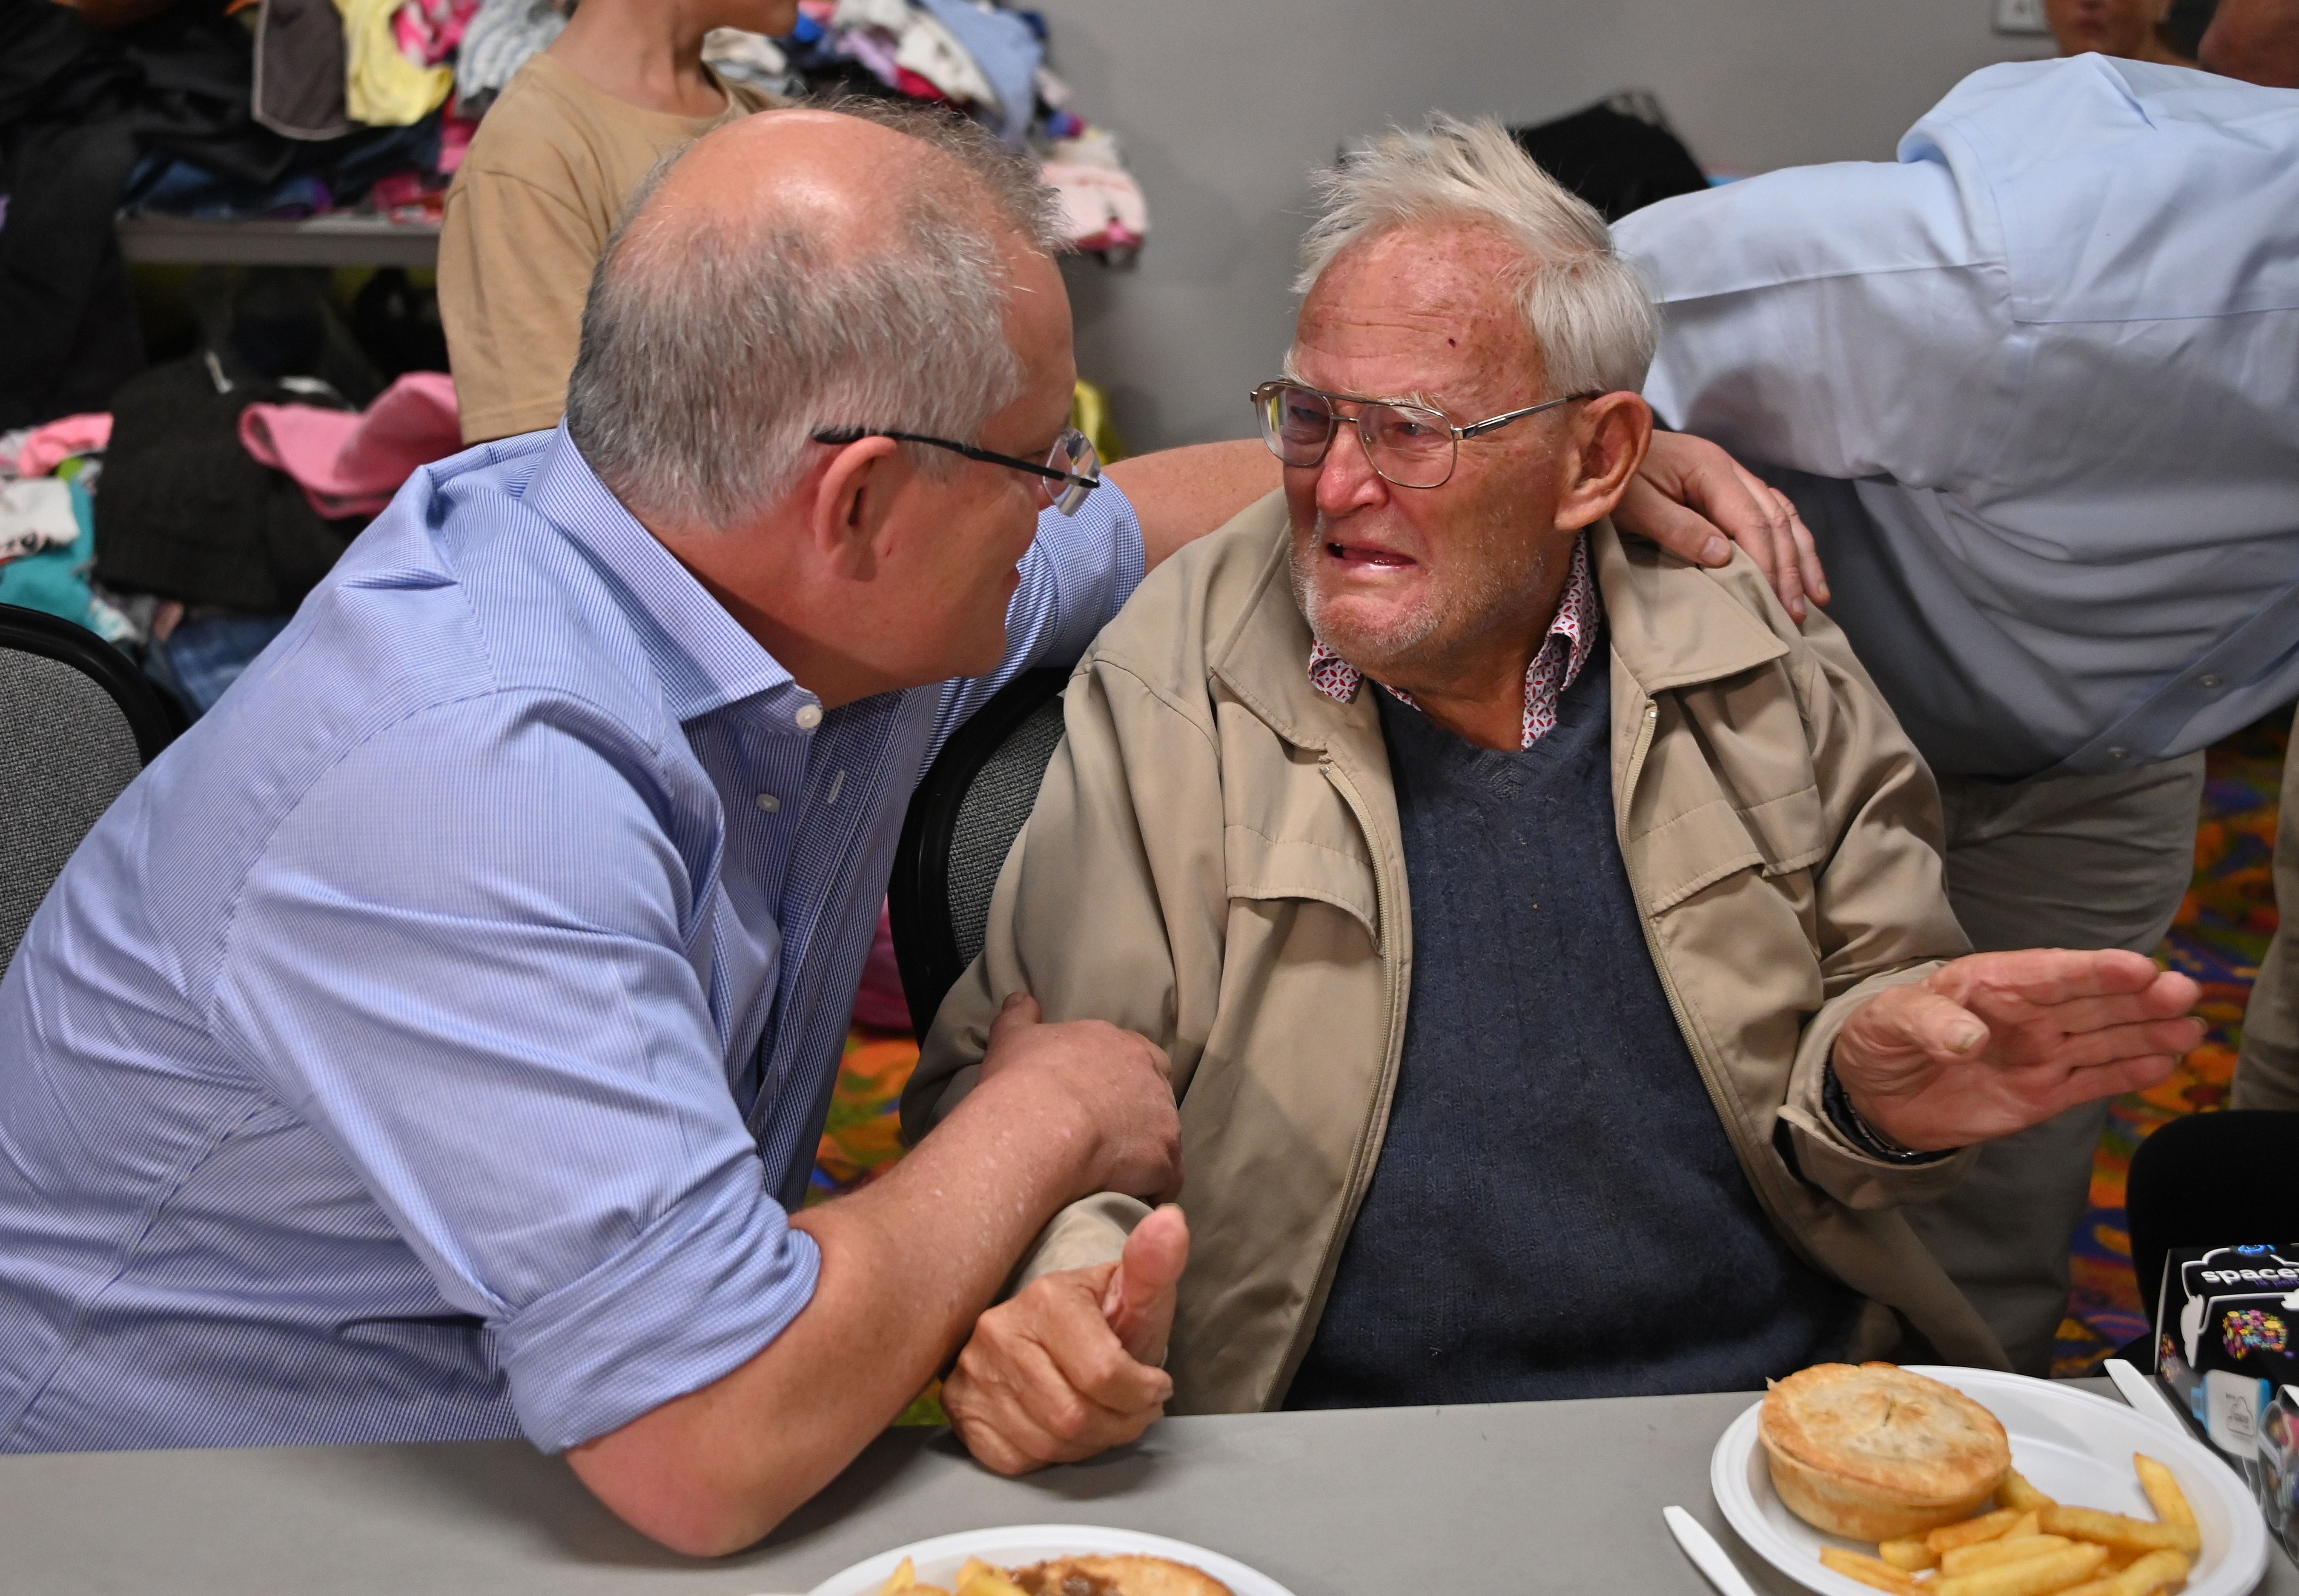 Australian Prime Minister Scott Morrison (L) comforts 85-year-old resident Owen Whalan at an evacauation centre in Taree 350km north of Sydney on November 10